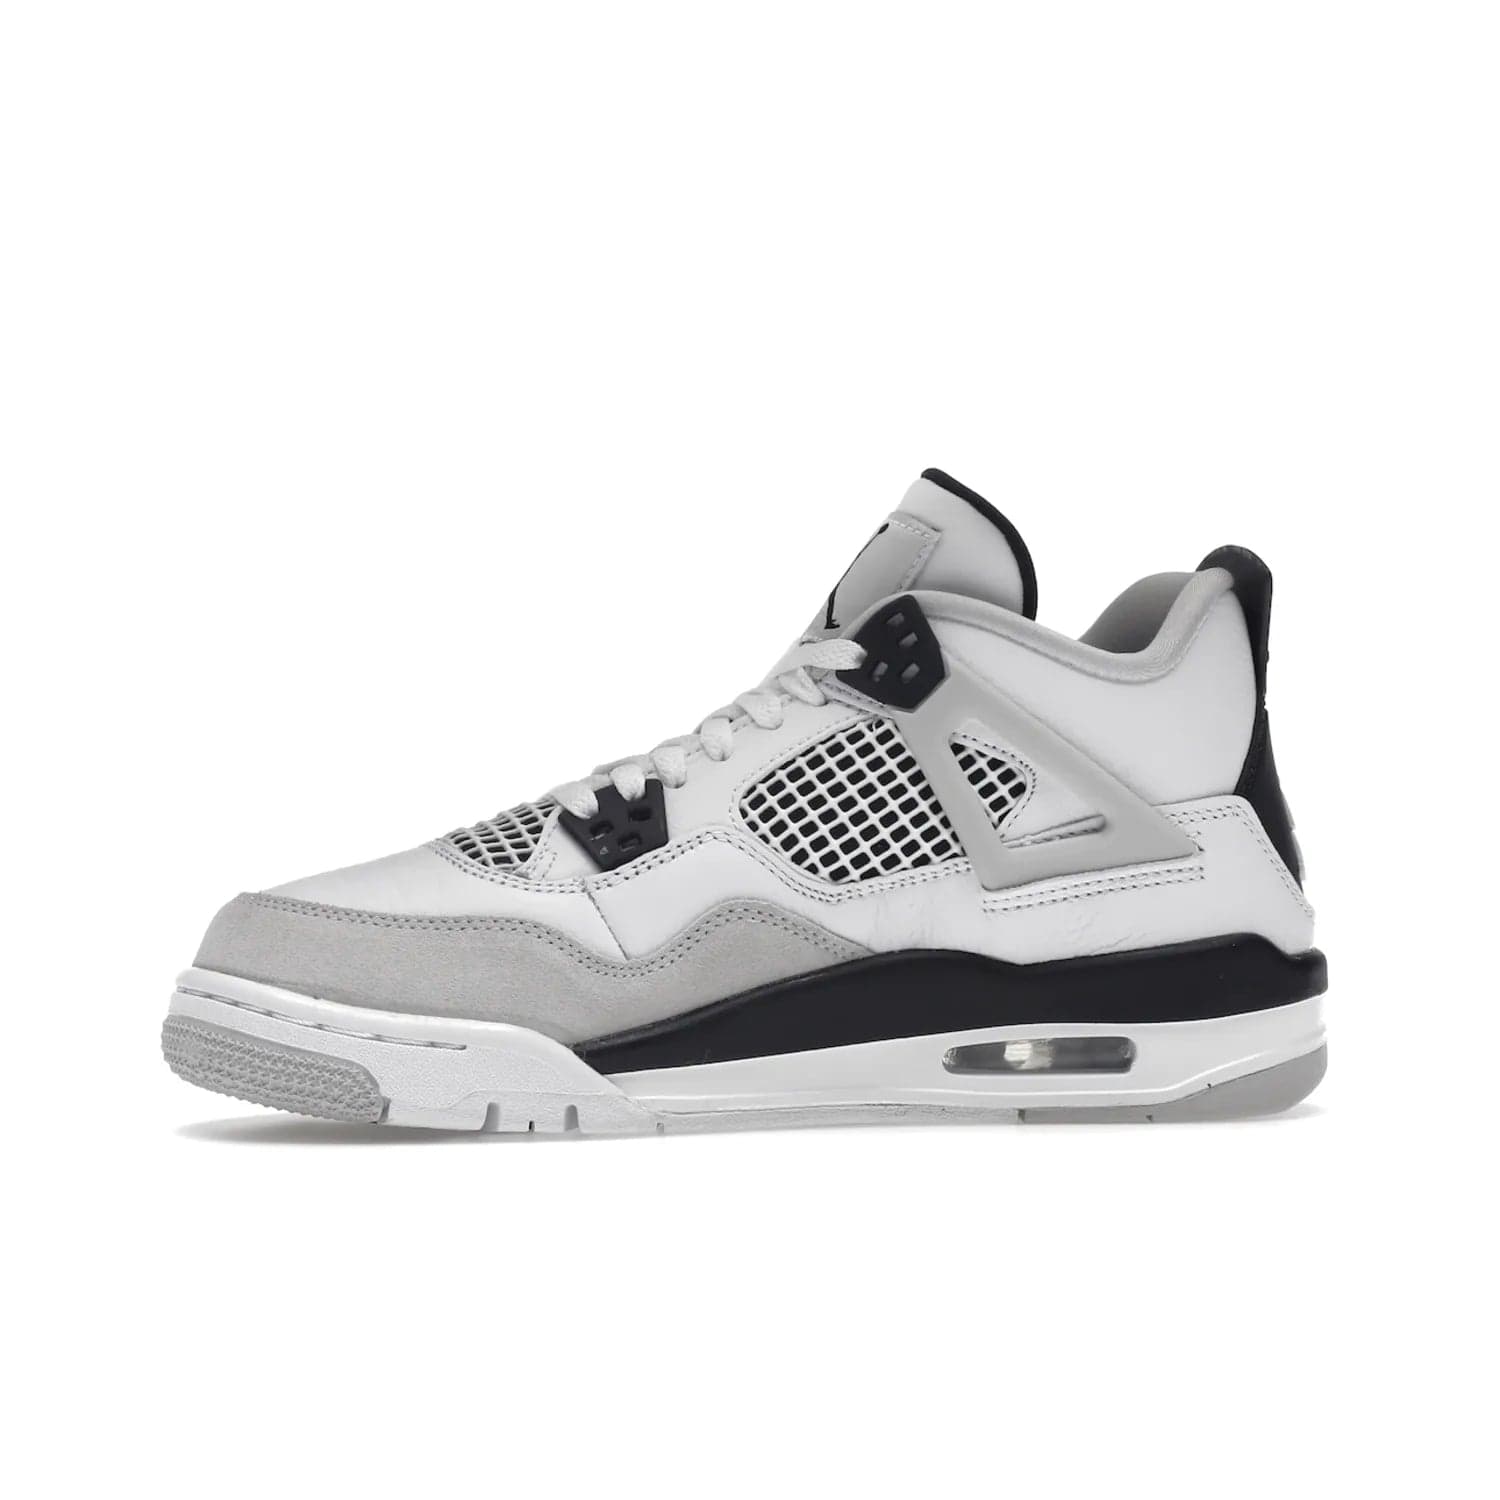 Jordan 4 Retro Military Black (GS) - Image 18 - Only at www.BallersClubKickz.com - A must-have for grade schoolers, the Air Jordan 4 Retro Military Black (GS) offers classic style with plenty of breathable support. Featuring a white sole and base with suede and leather overlays in subtle black and grey tones, the shoes are perfect for active pursuits and everyday comfort. Get an instant classic today!